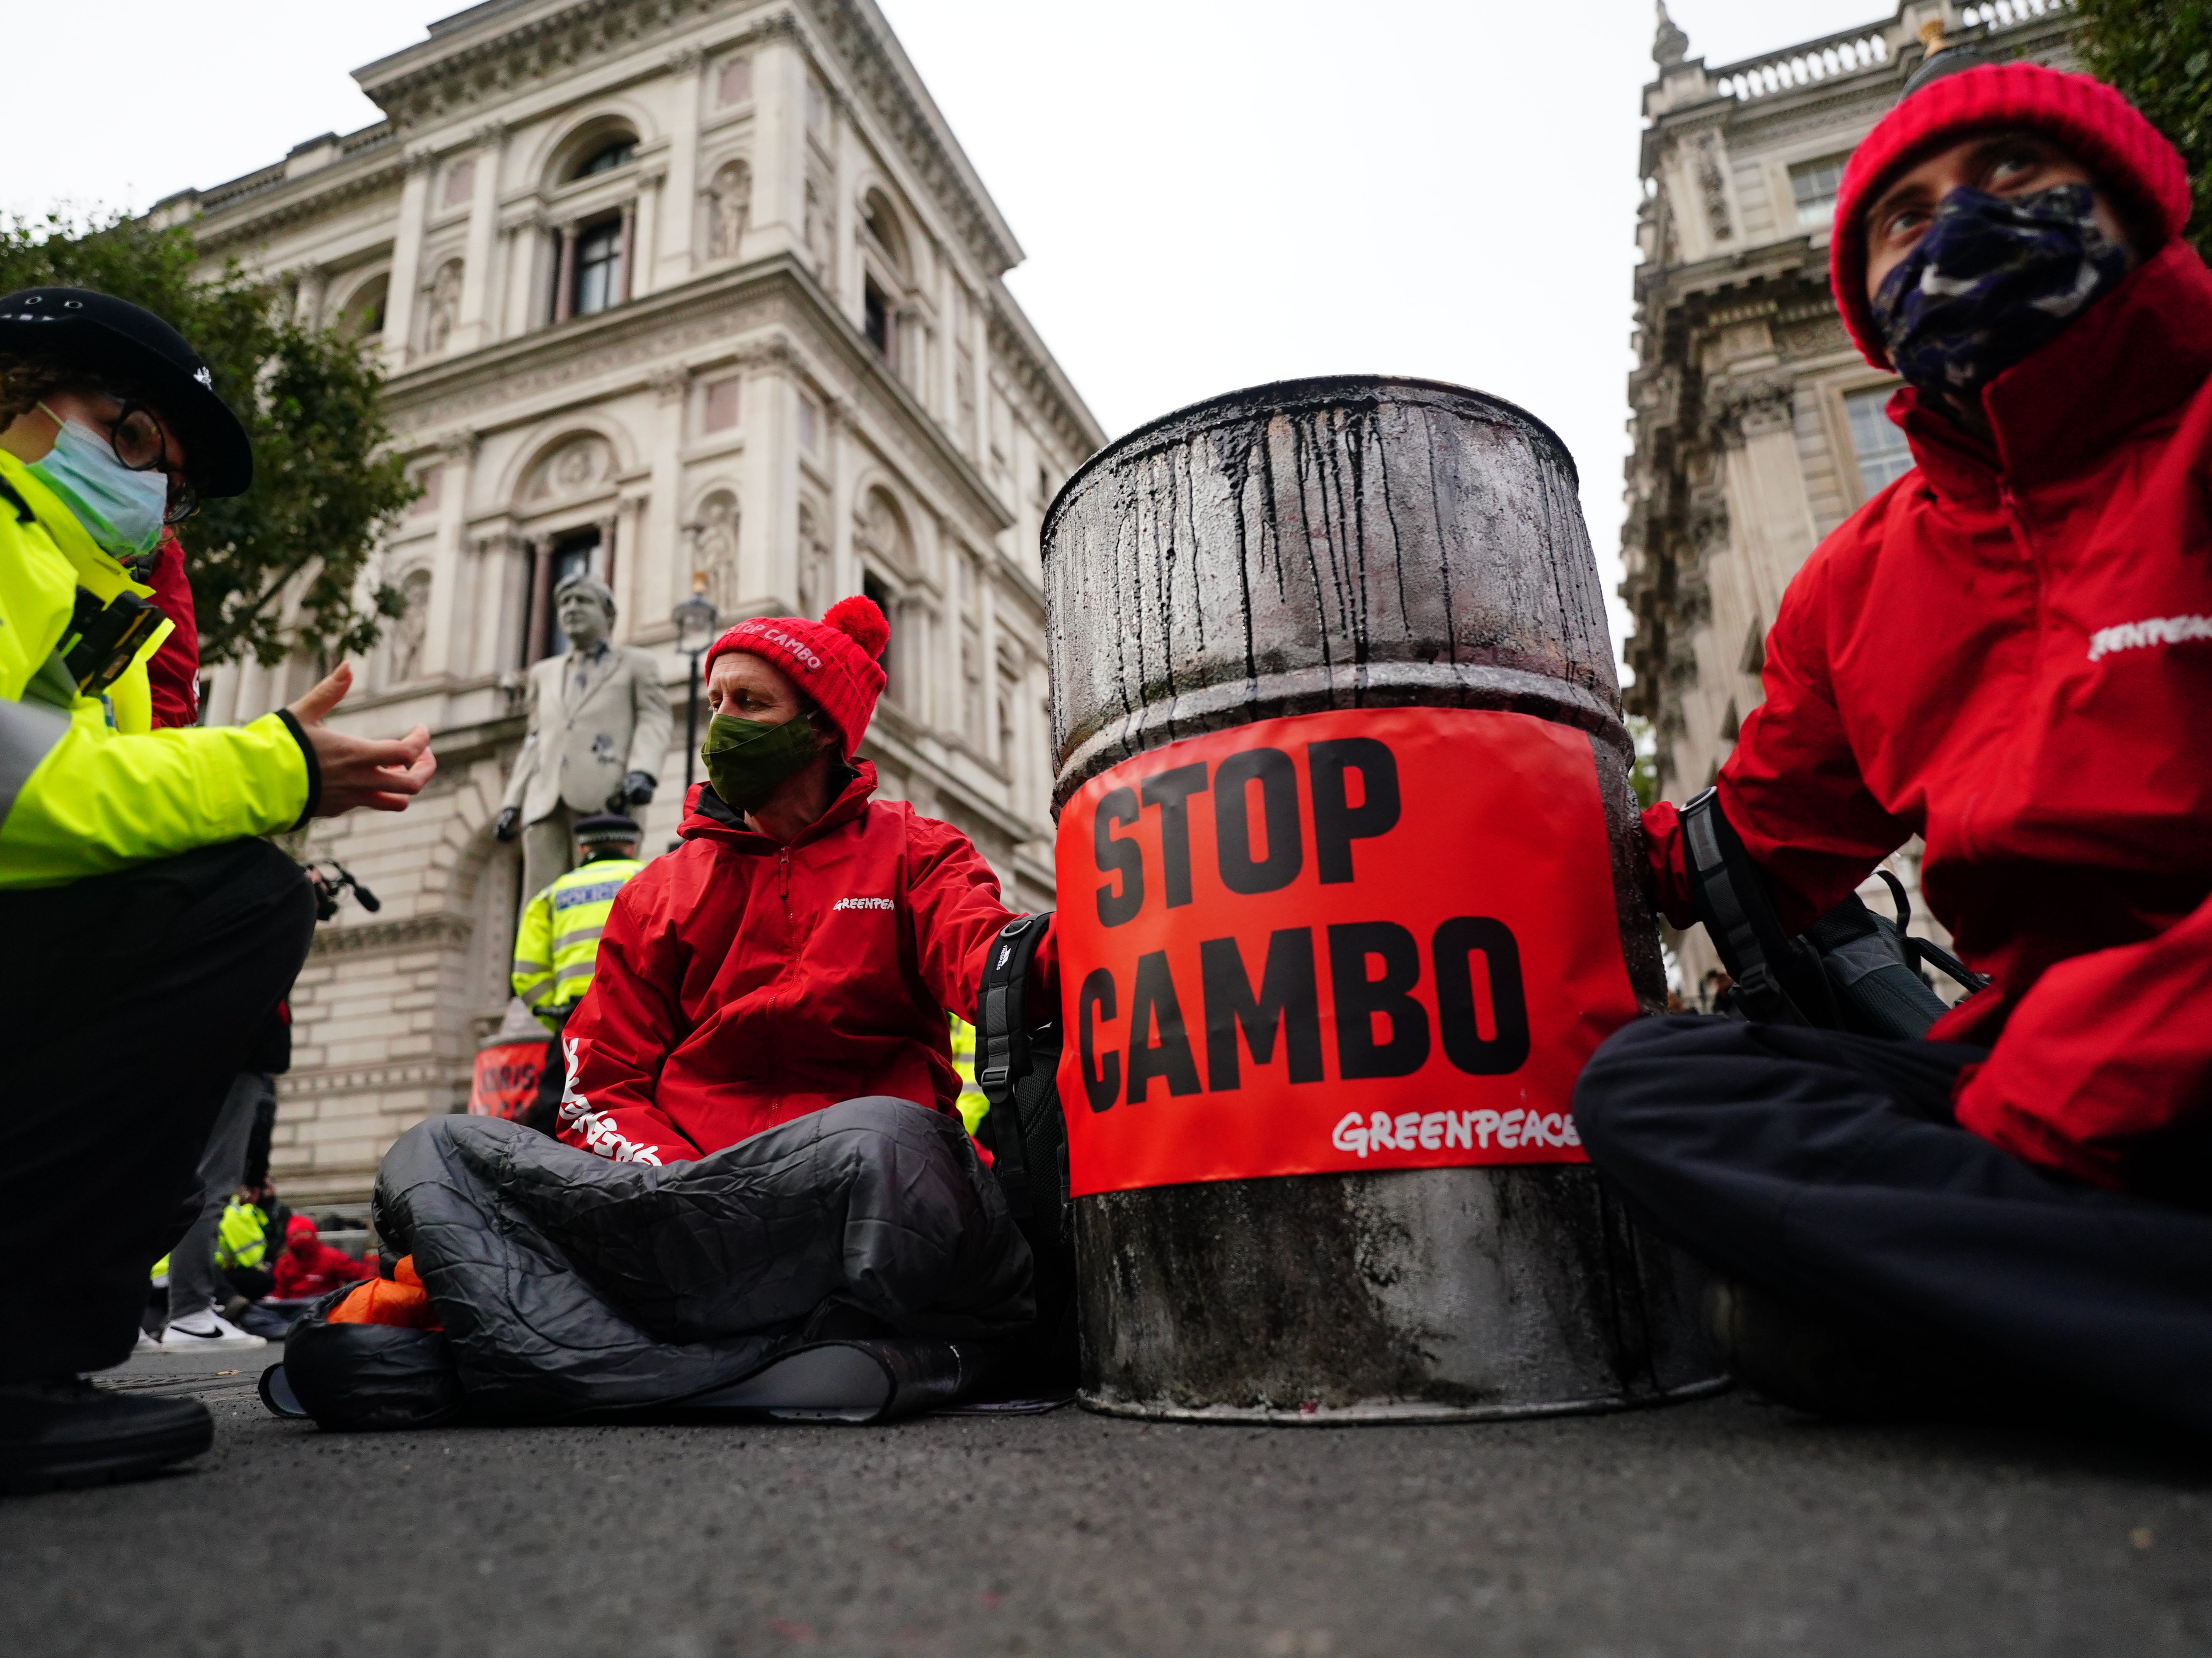 Campaigners from Greenpeace opposed to Cambo oilfield protest outside Downing Street